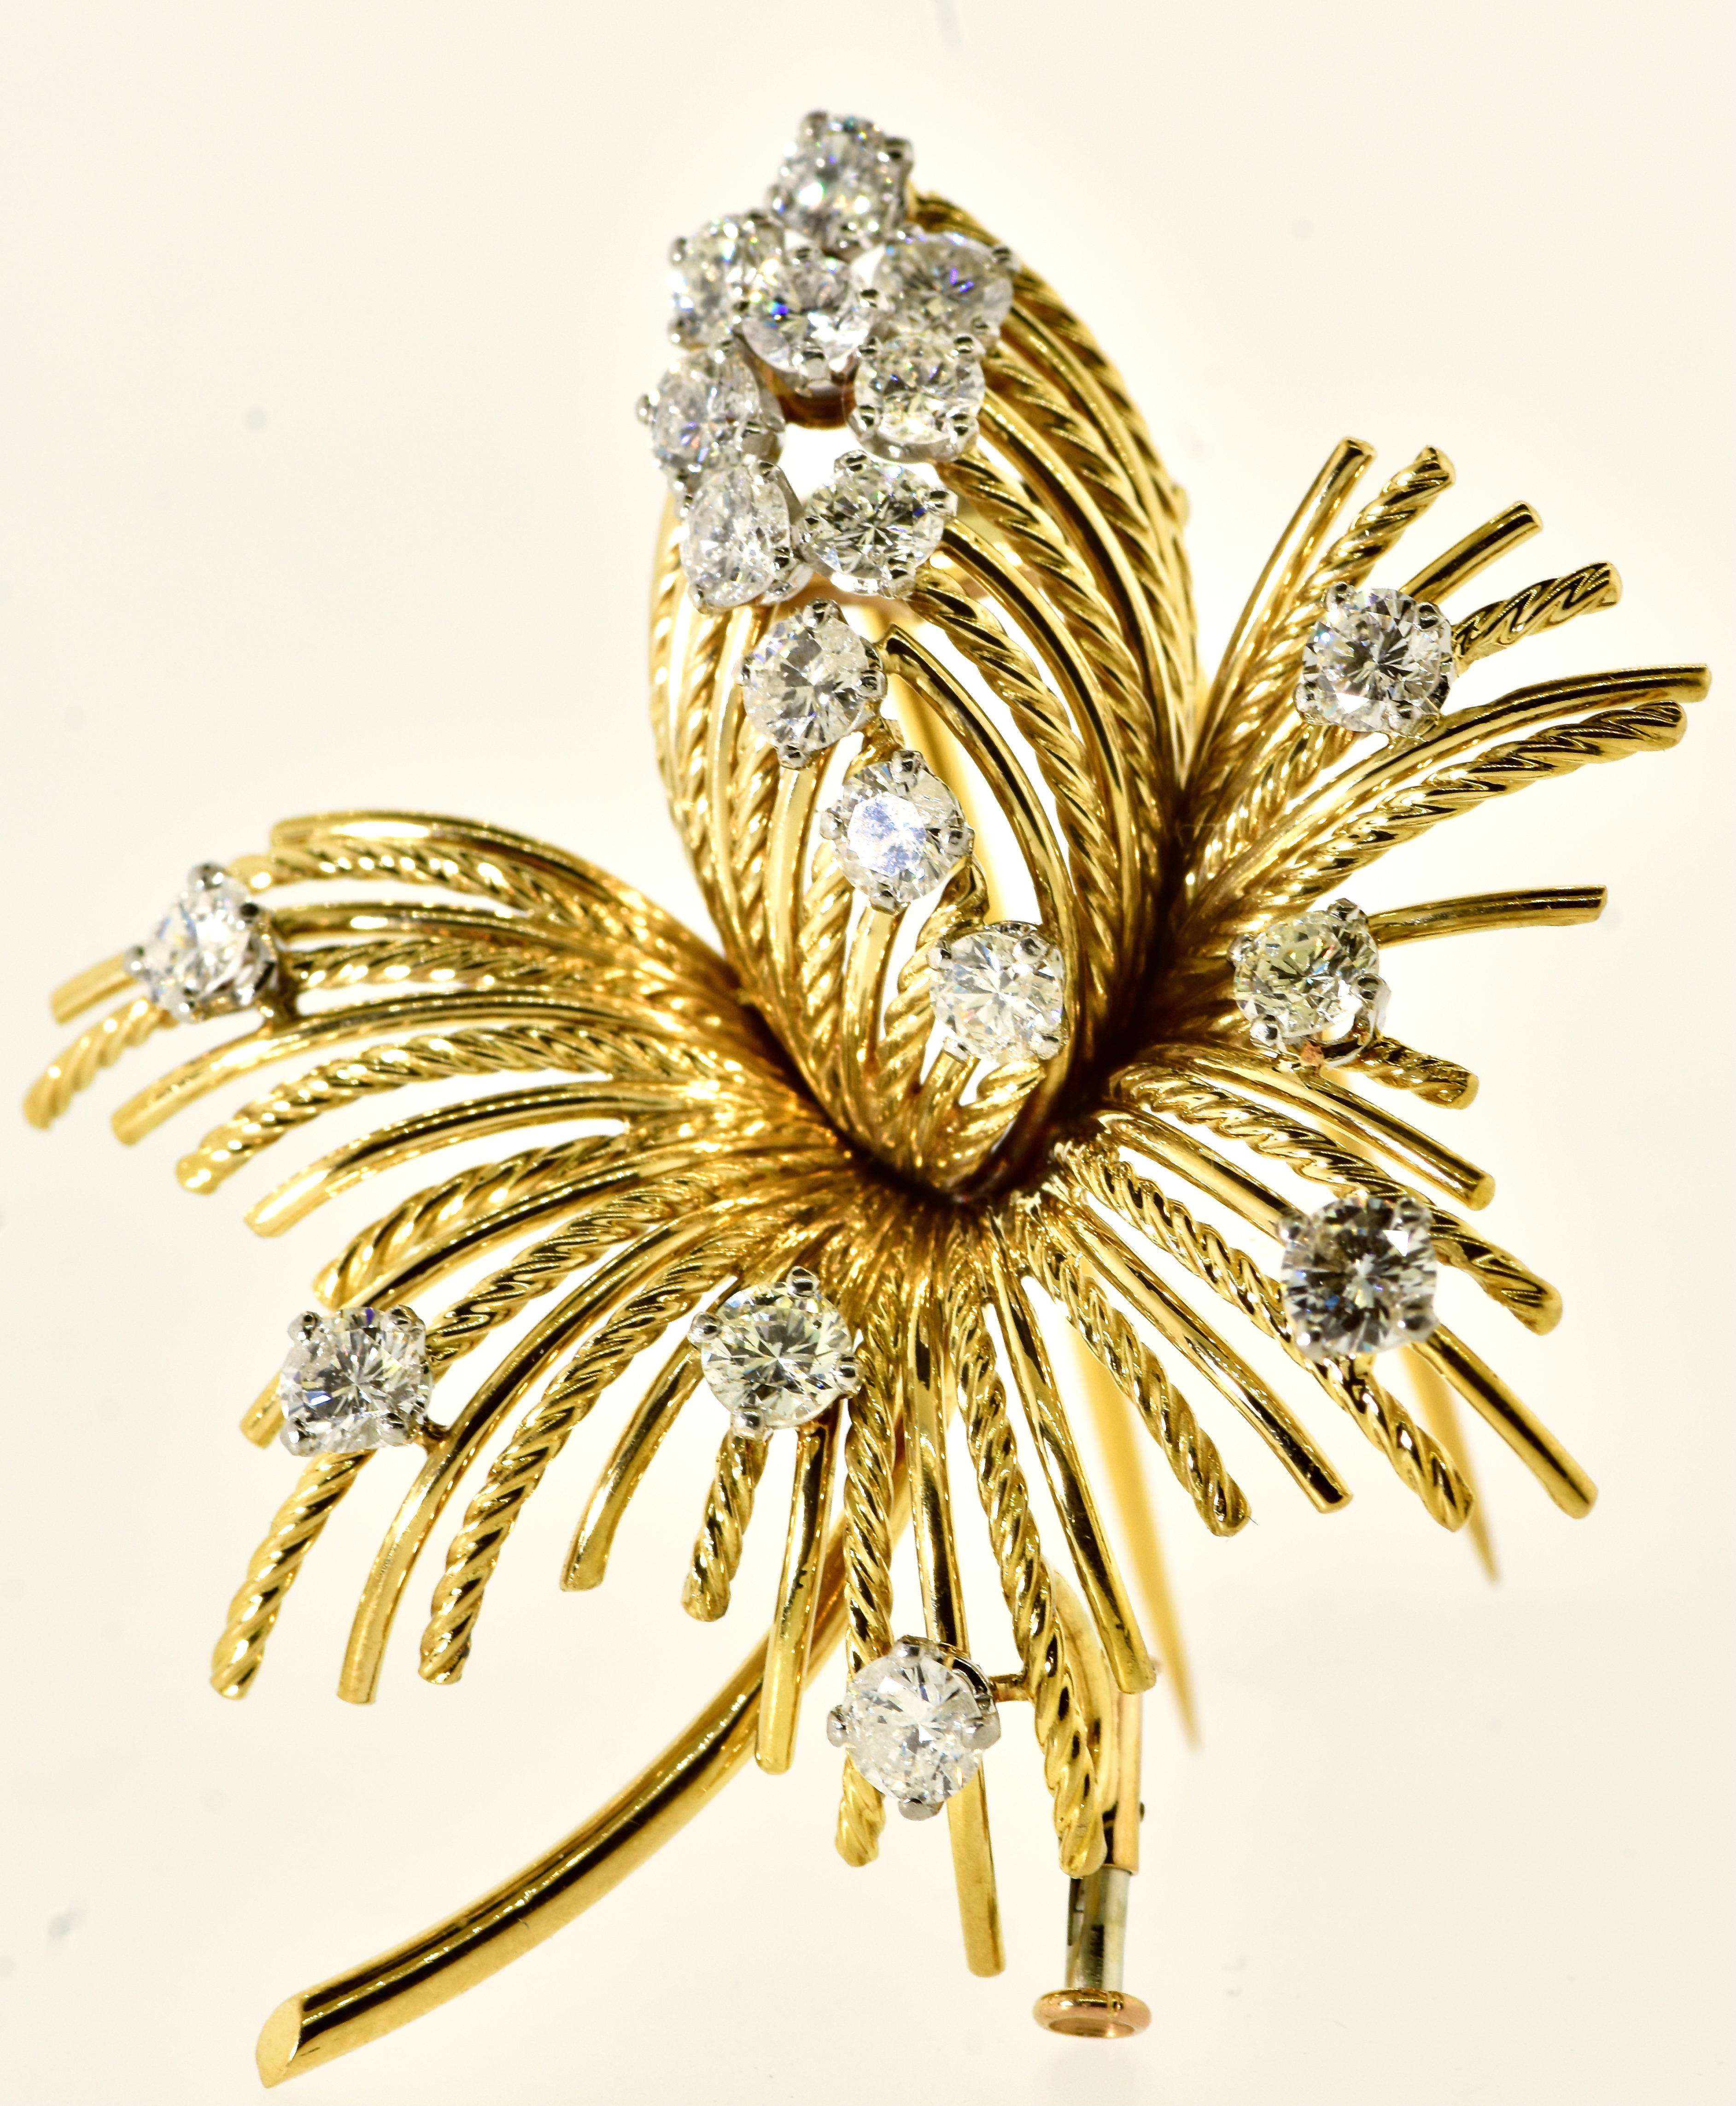 Diamond brooch made in Paris in the early '60's, possesses 18 fine white diamonds set in white prongs.  All well cut and finely matched the estimated diamond weight is 3.10 cts.  All the diamonds are slightly included and near colorless (H).

This